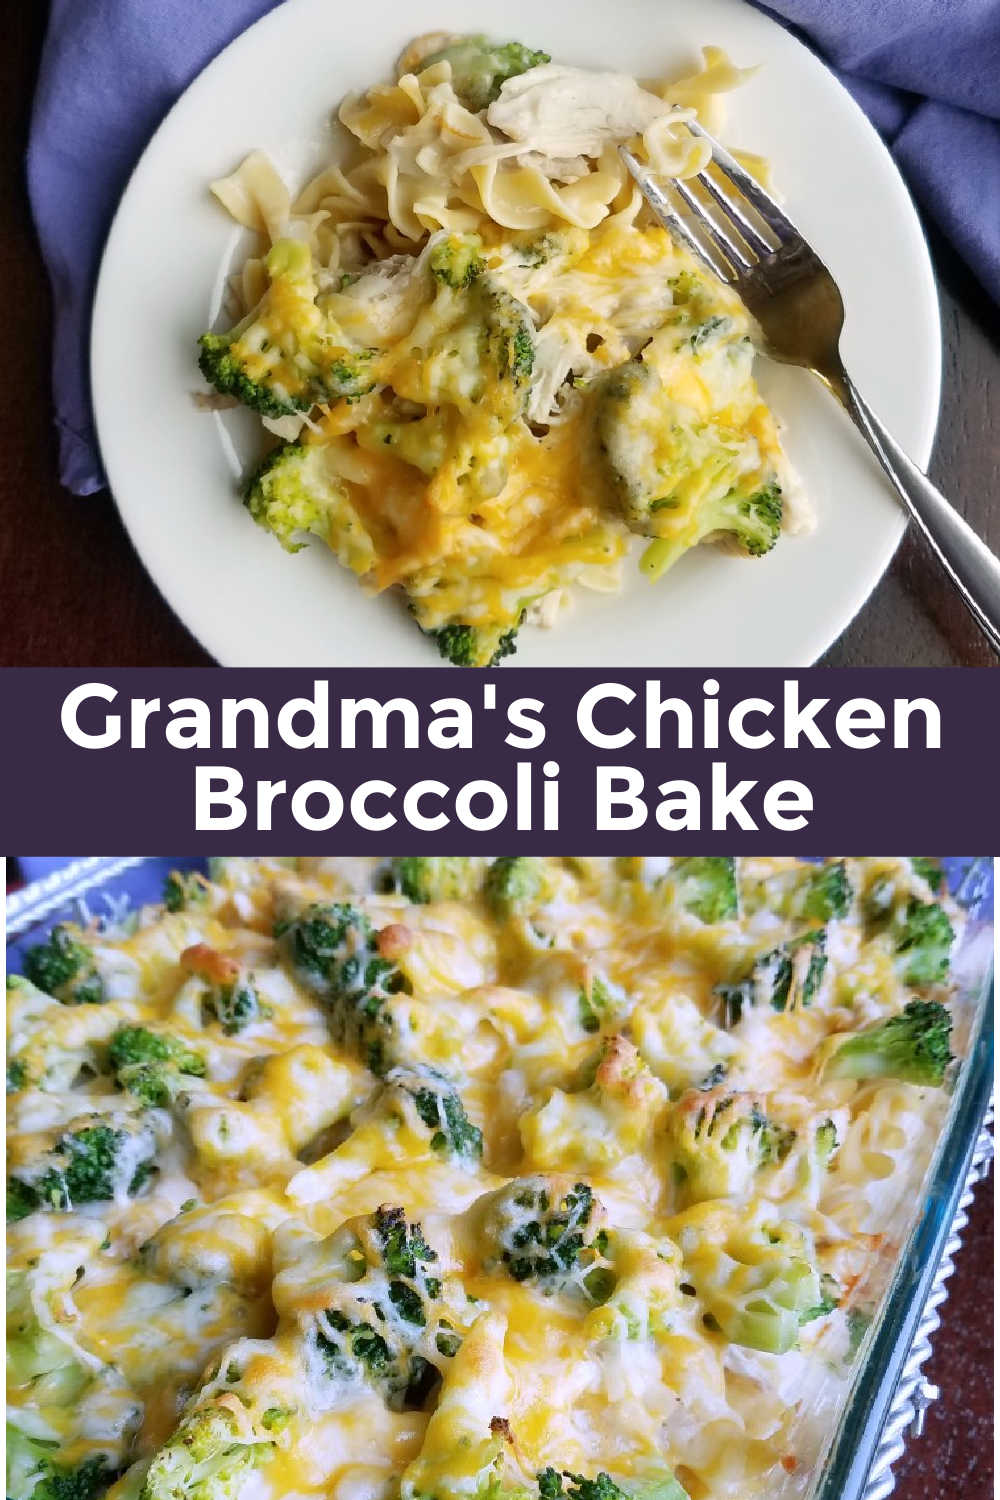 This chicken and broccoli casserole is a great way to get dinner on the table quickly. It is a perfect way to use leftover chicken or turkey as well!